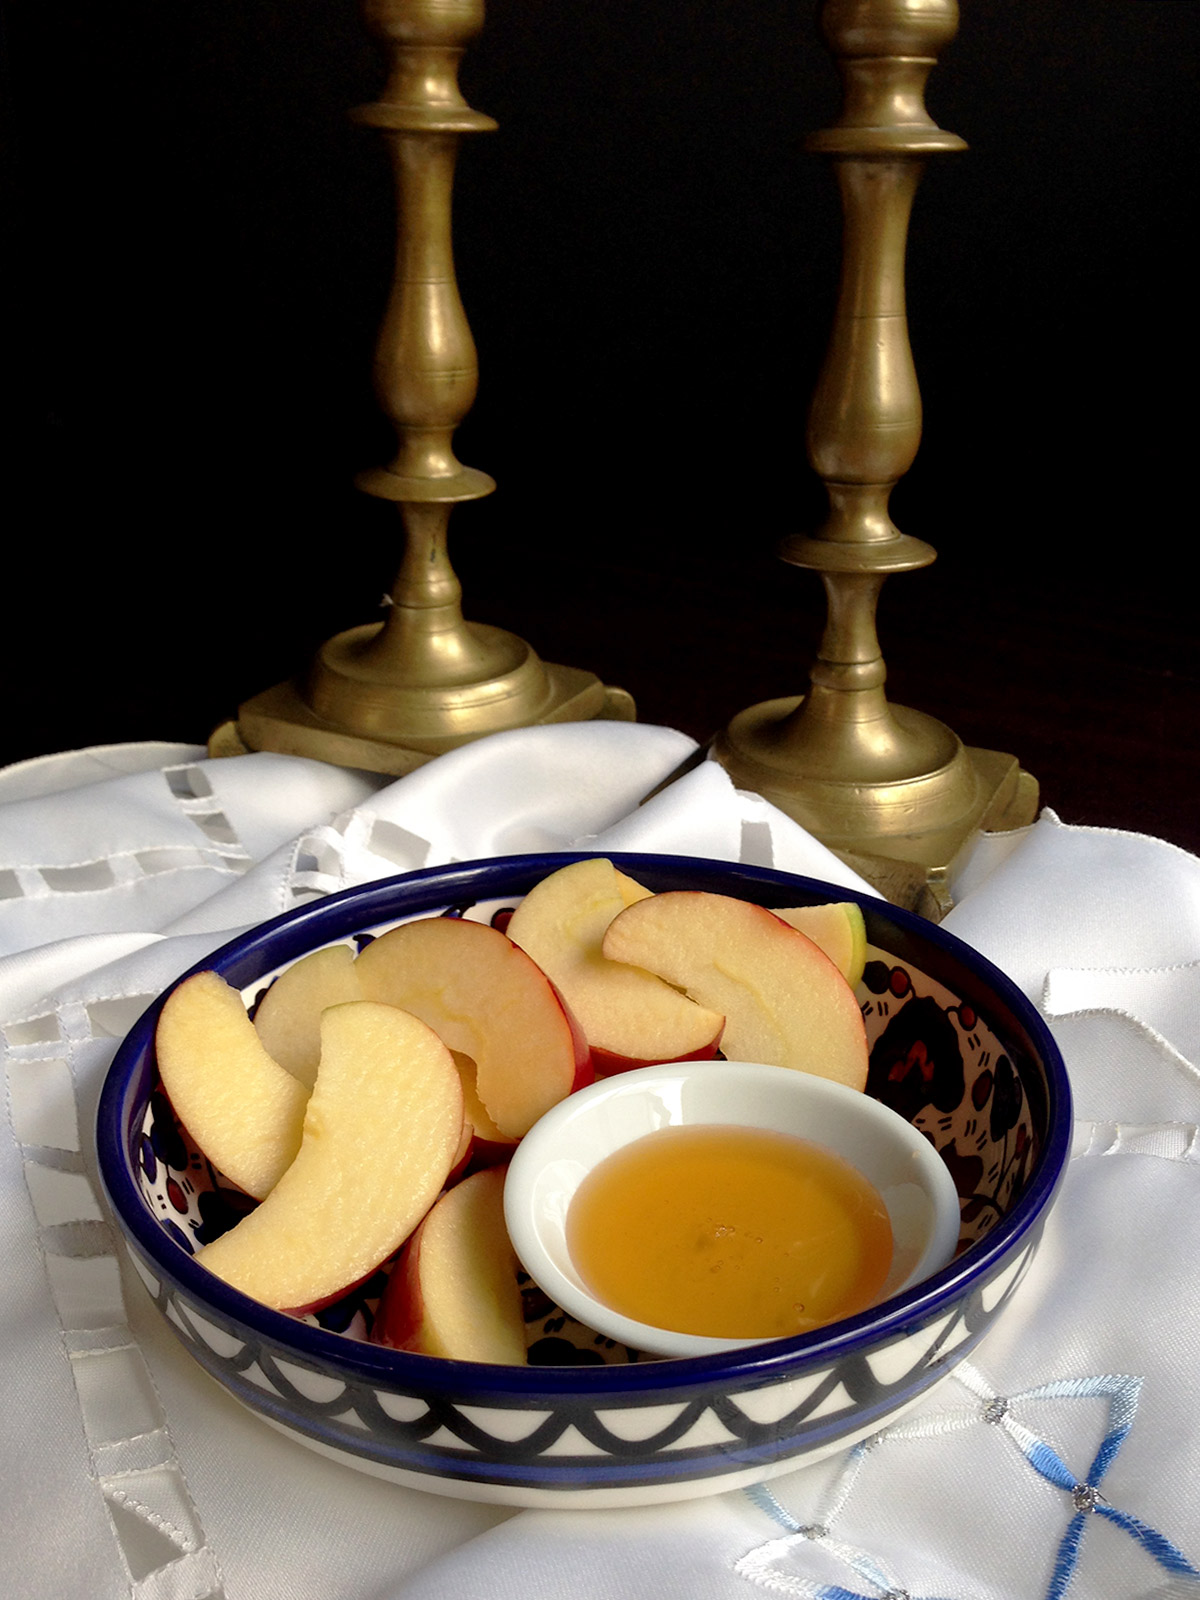 Apples and honey in a blue bowl with two shabbat candlesticks in the background.